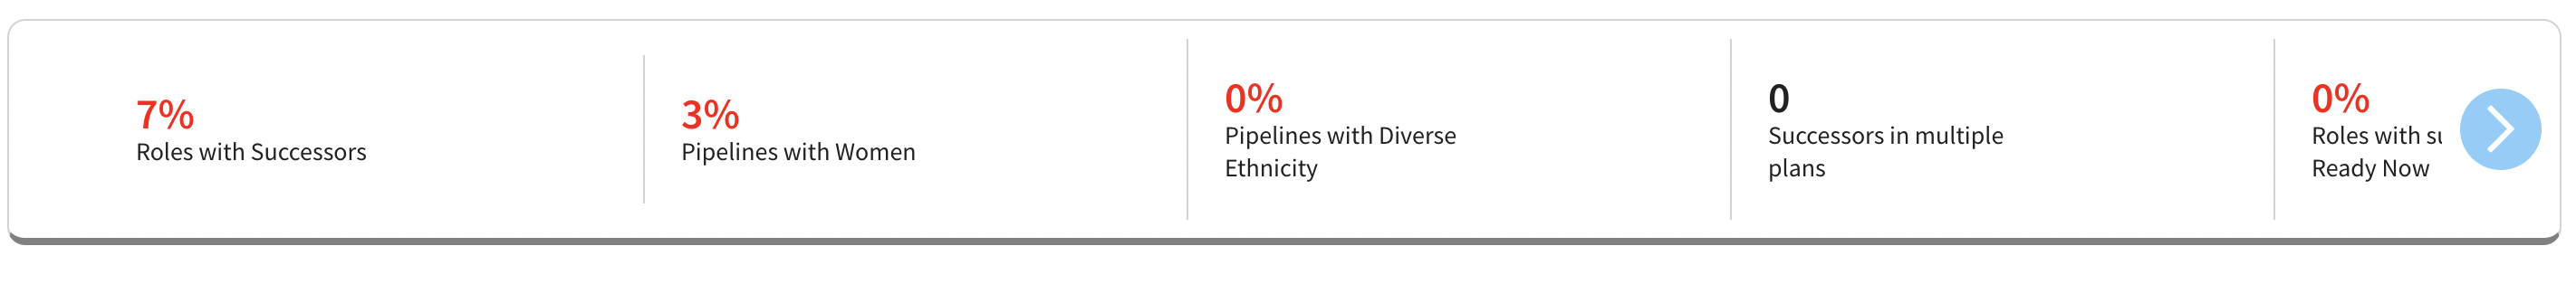 Stats bar with percentages for roles with successors, pipelines with women, and pipelines with diverse ethnicity.